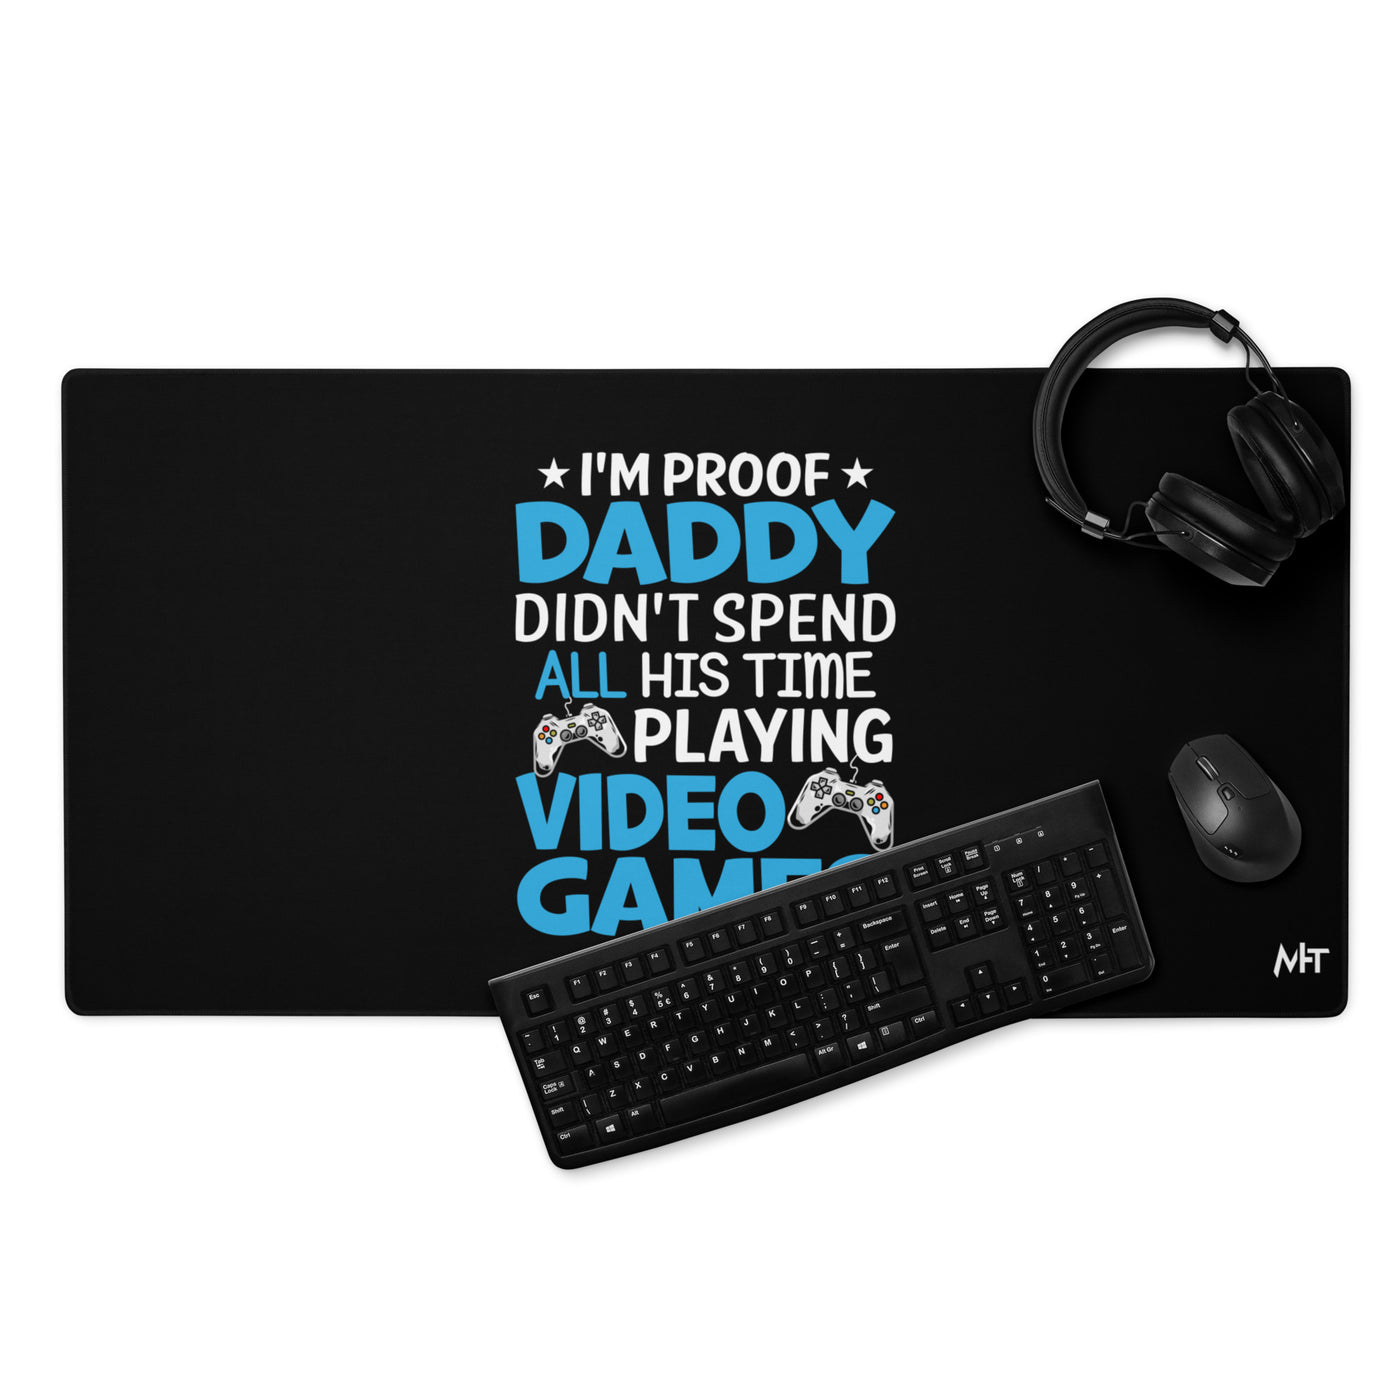 I am Proof * Daddy didn't spend his time playing Video Games* - Desk Mat